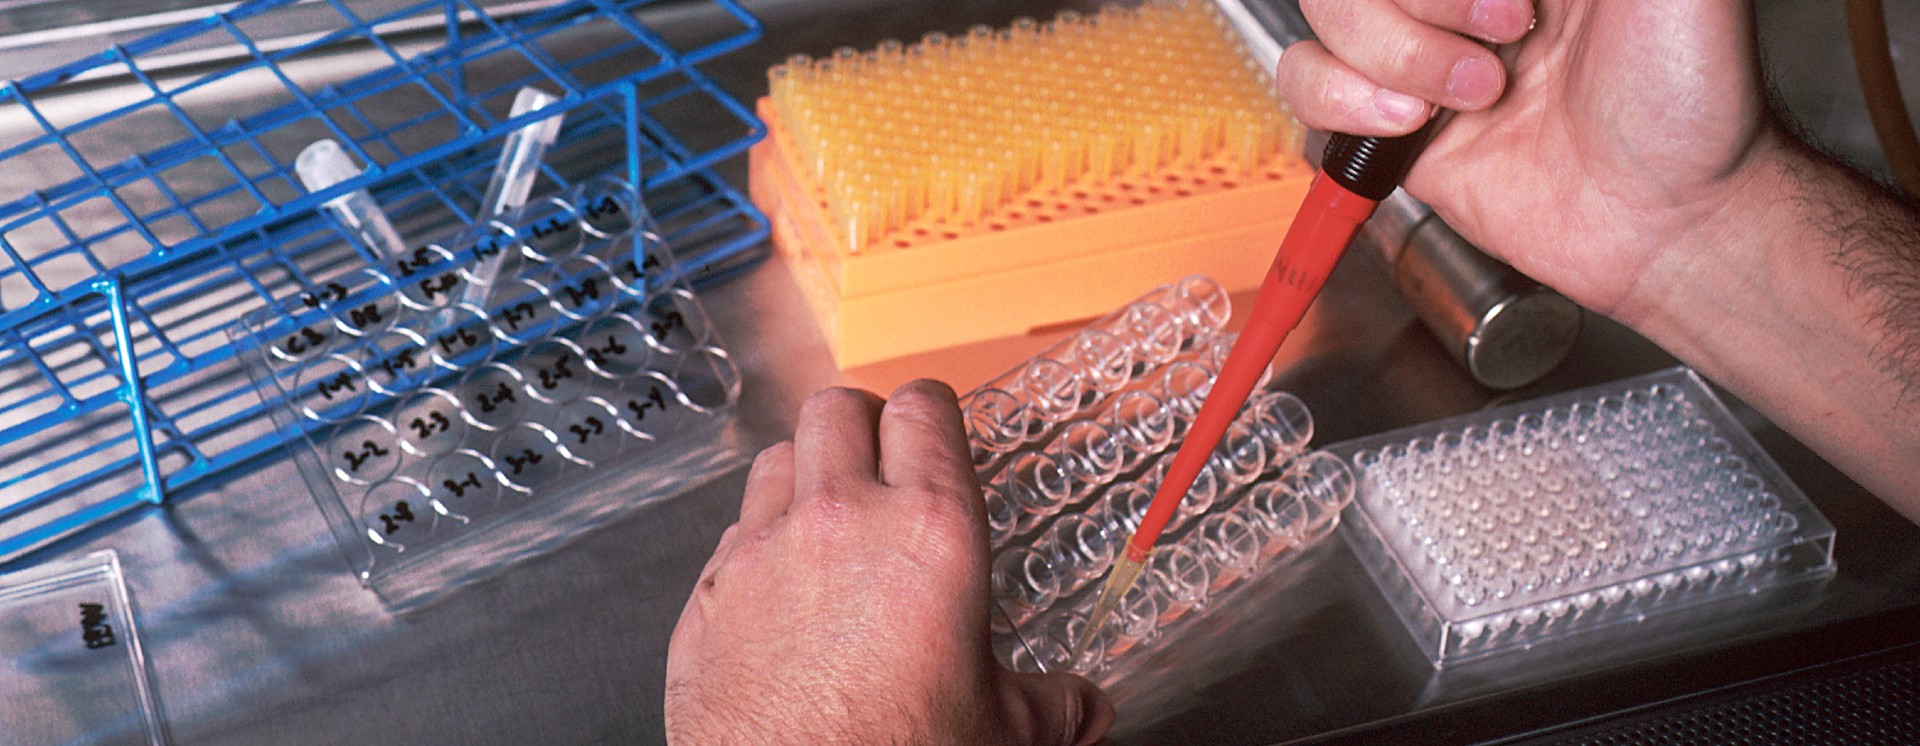 Hands pipetting samples into testtubes